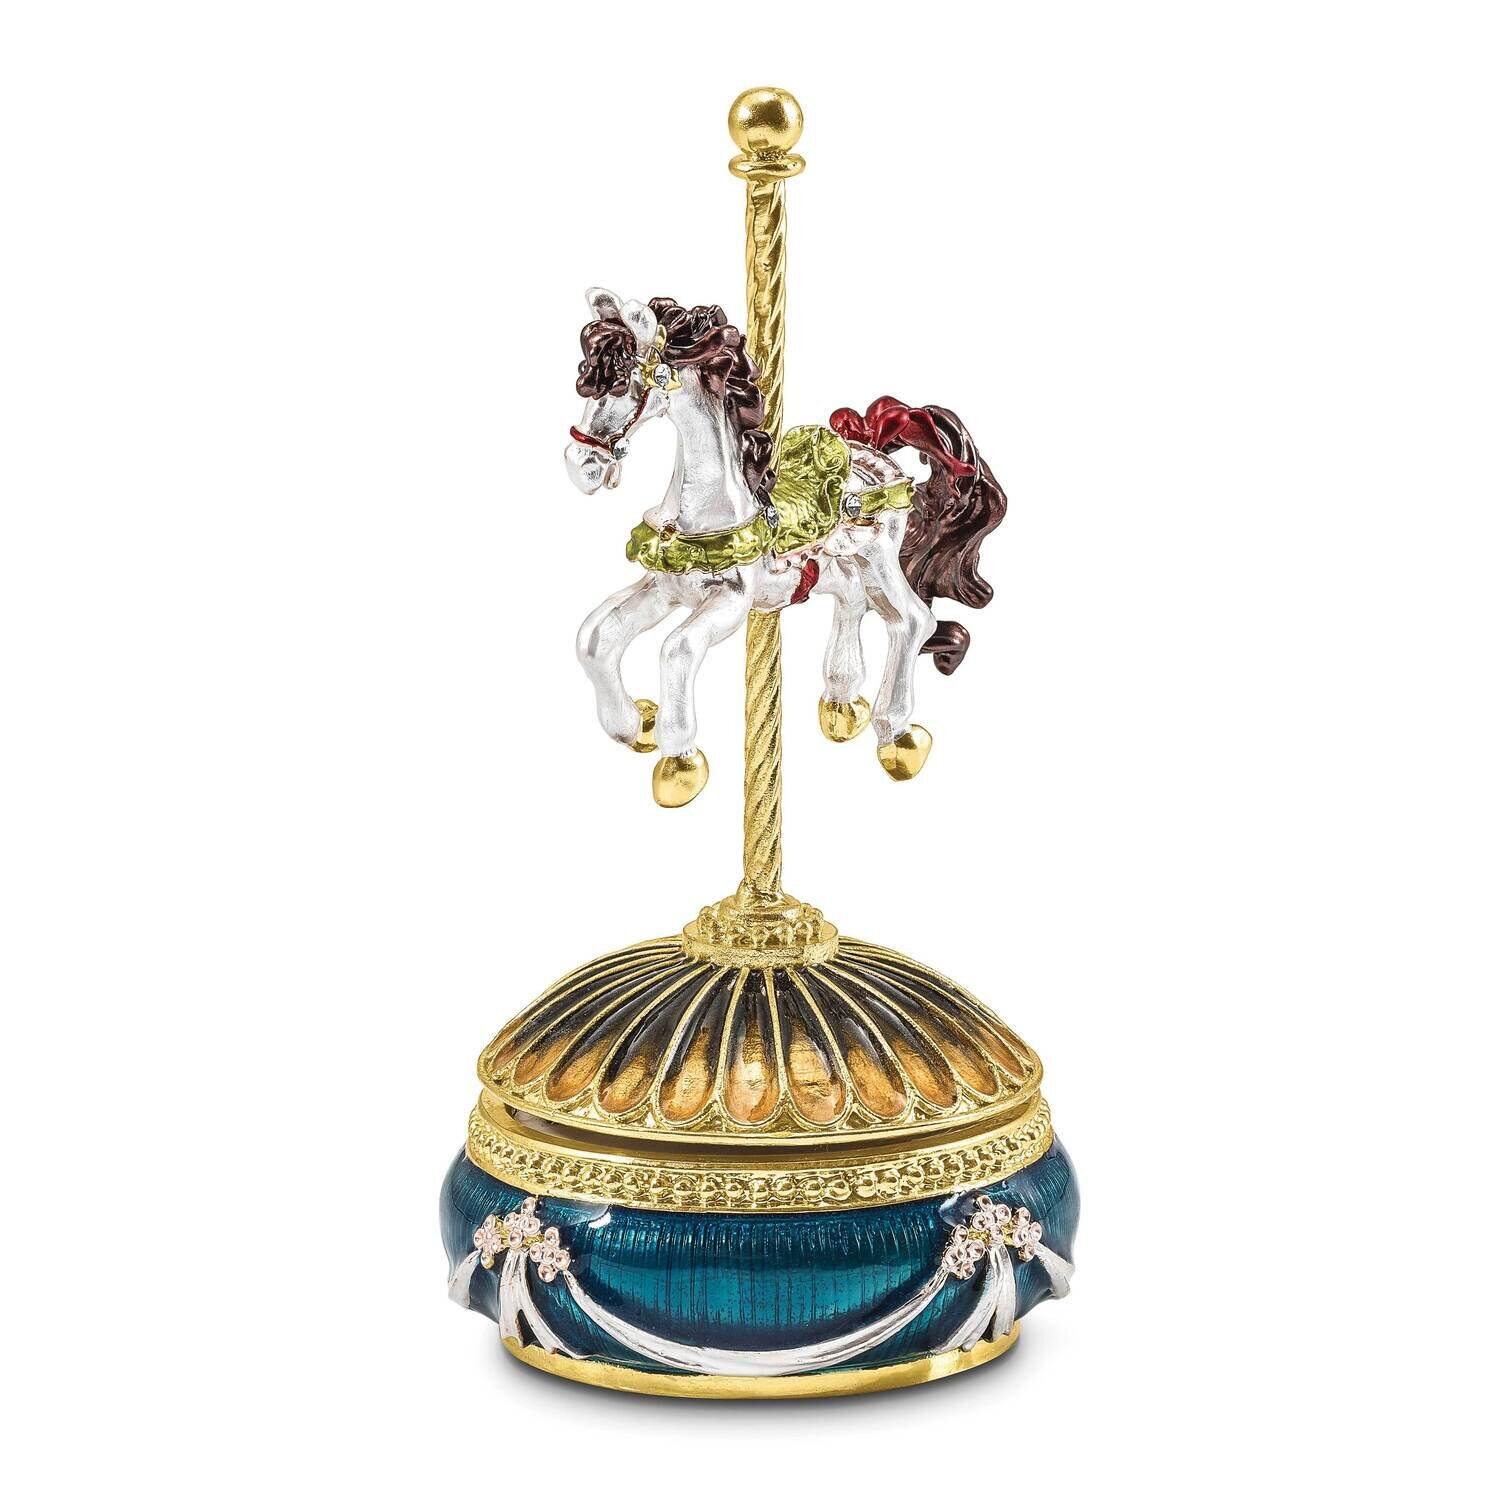 By Jere PAL (Plays It's a Small World) Carousel Horse Musical Figurine with Matching 18 Inch Necklace Pewter Bejeweled Crystals Gold-tone Enameled BJ4140